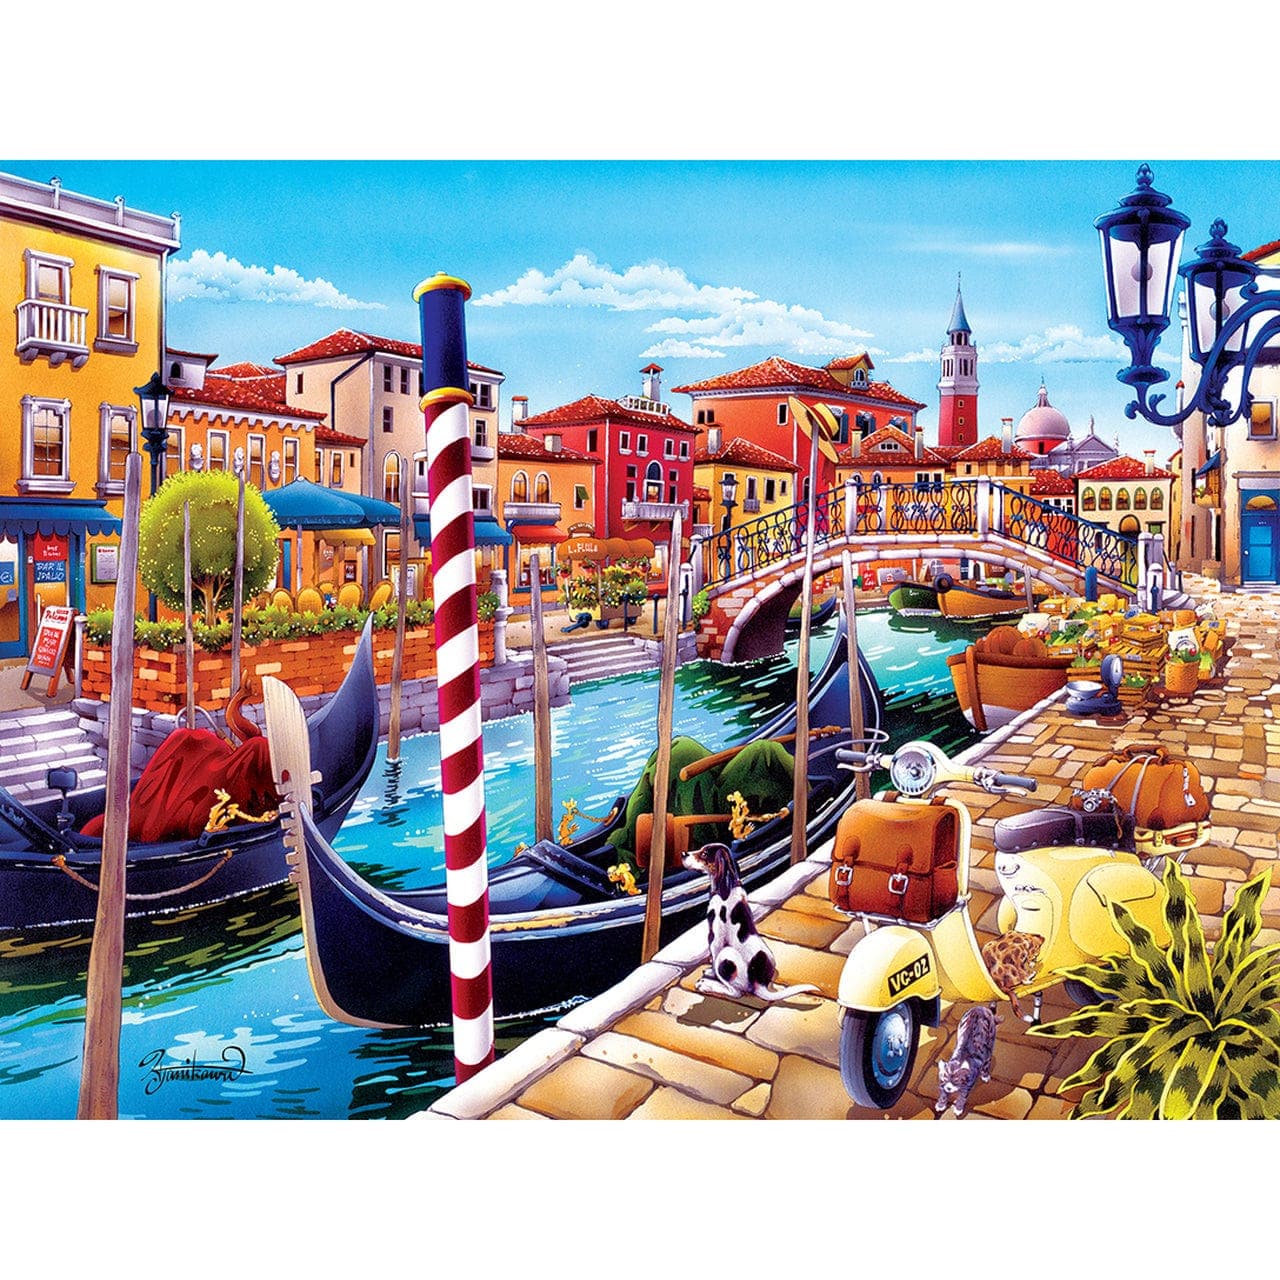 MasterPieces-Travel Diary - Venice - 550 Piece Puzzle-31976-Legacy Toys